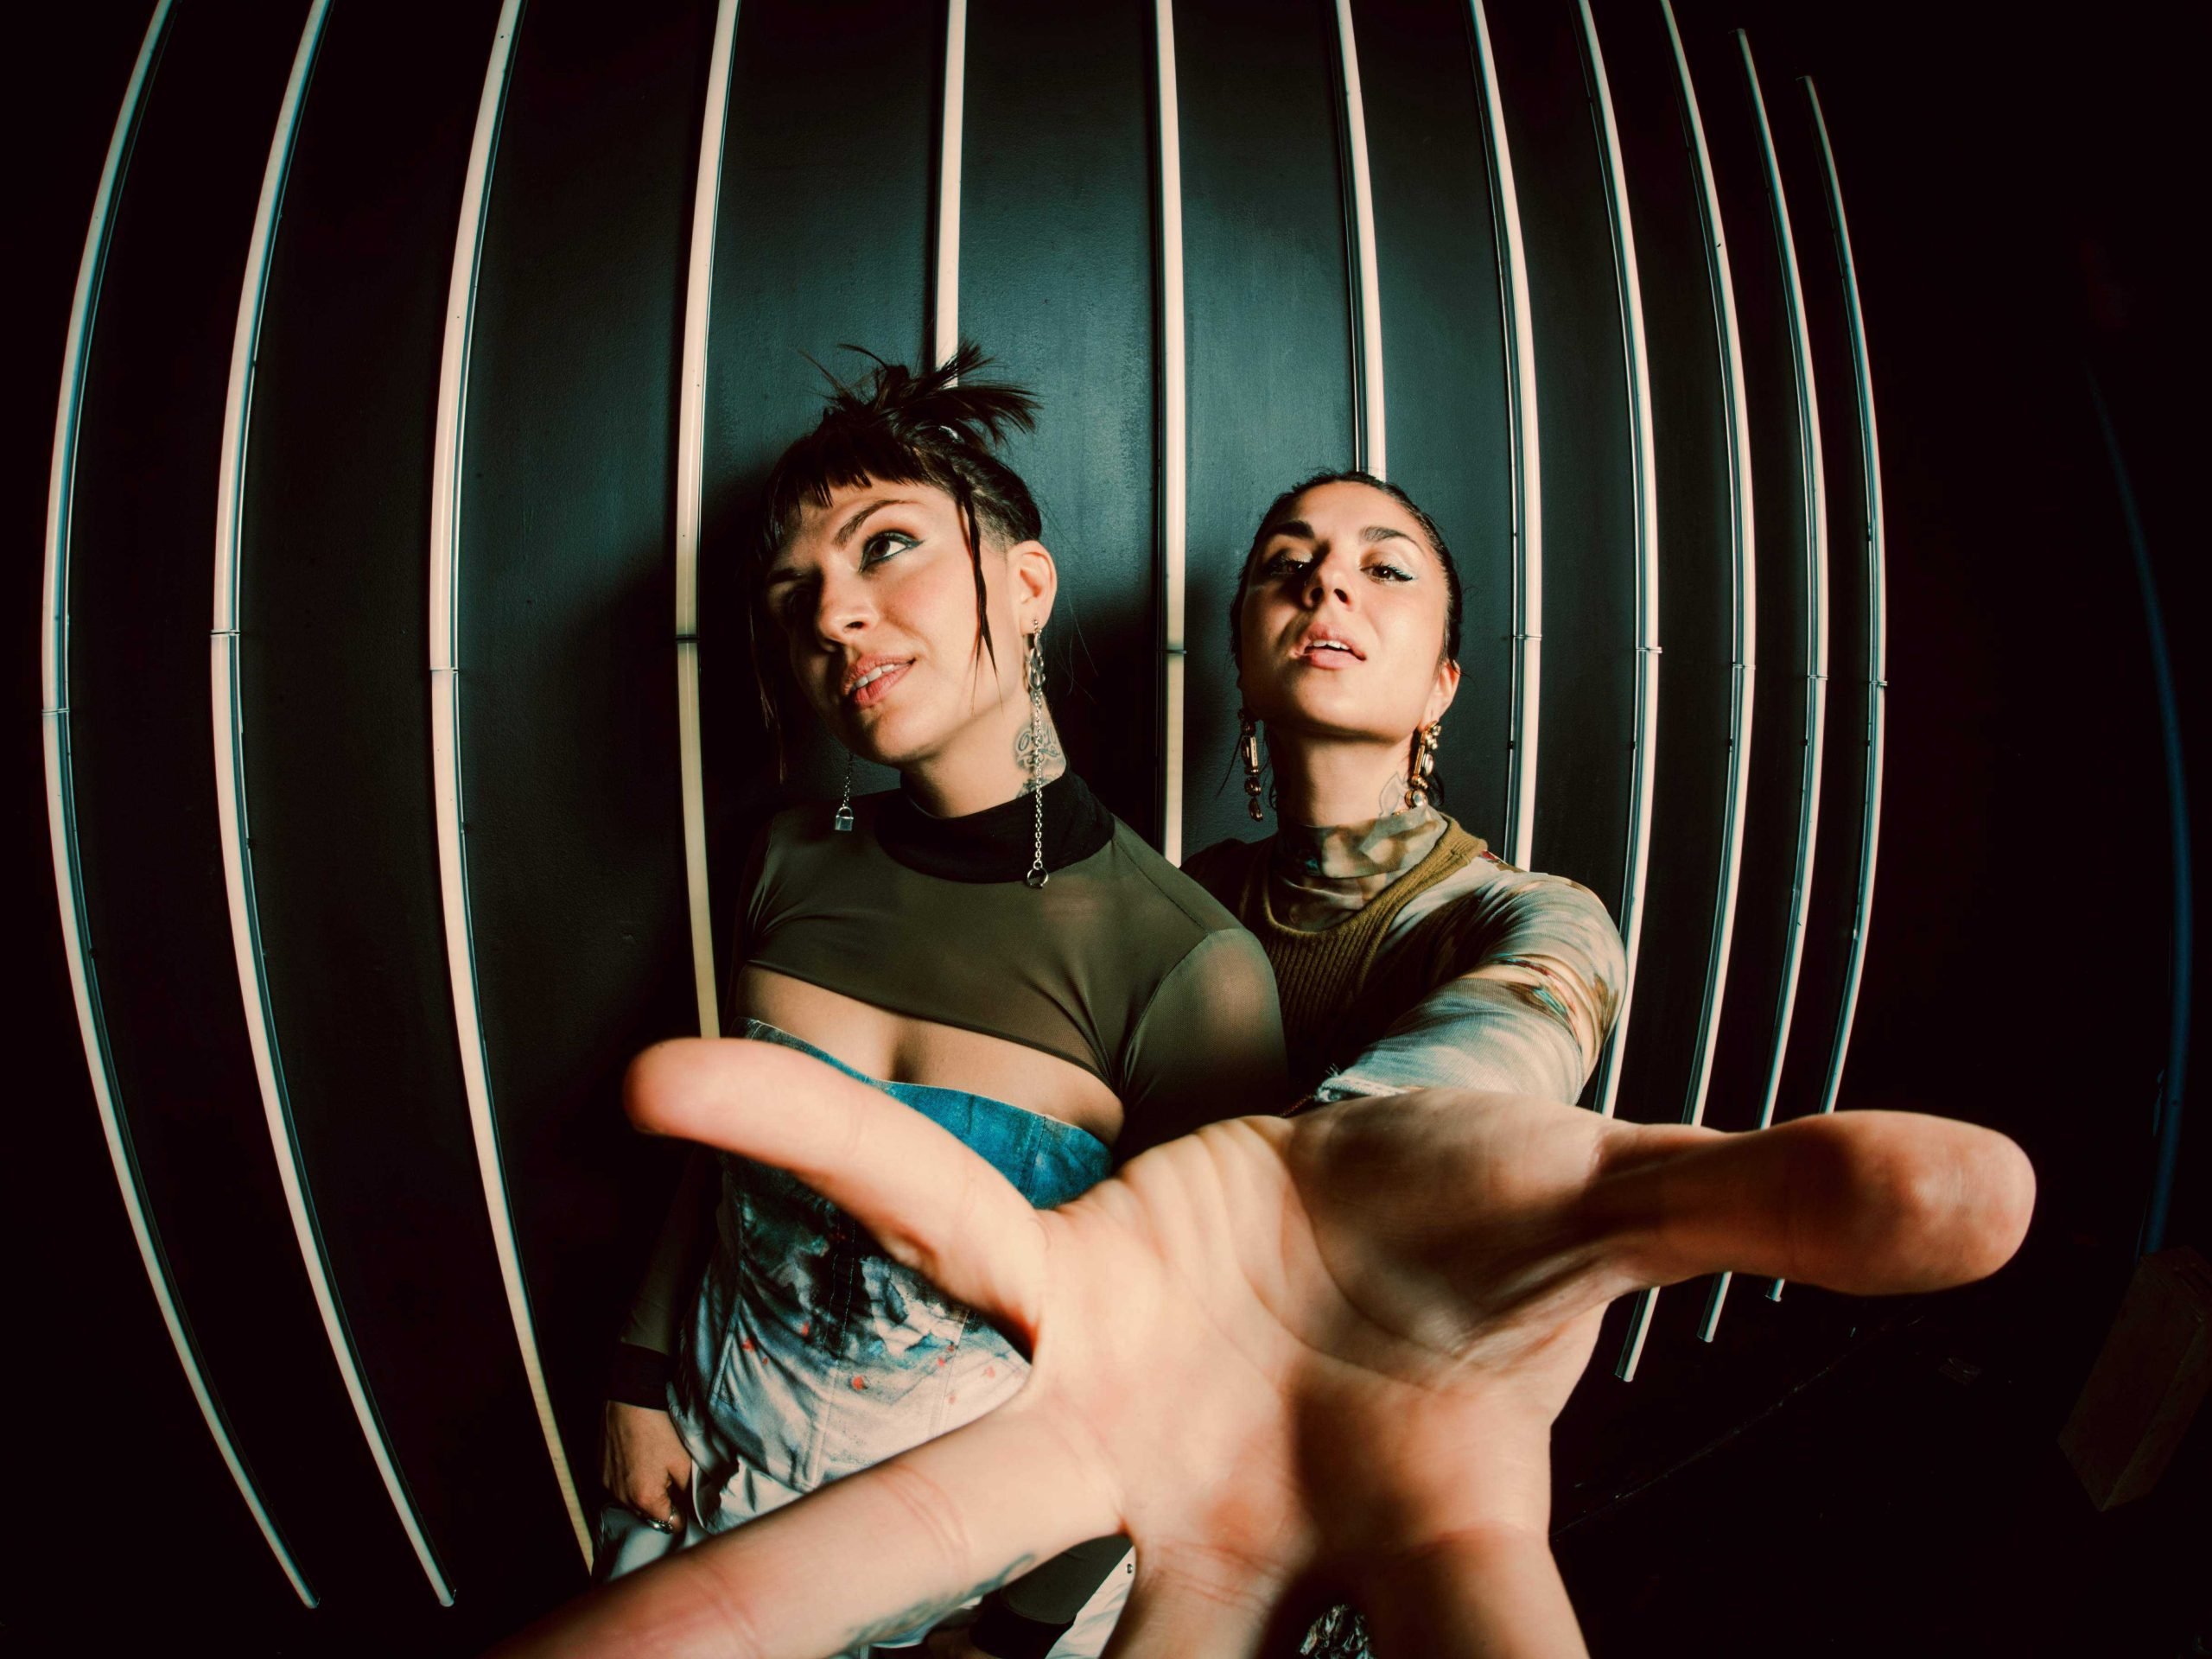 Breaking Down the Walls: Krewella explores new depths in new album, 'The Body Never Lies' + Interview